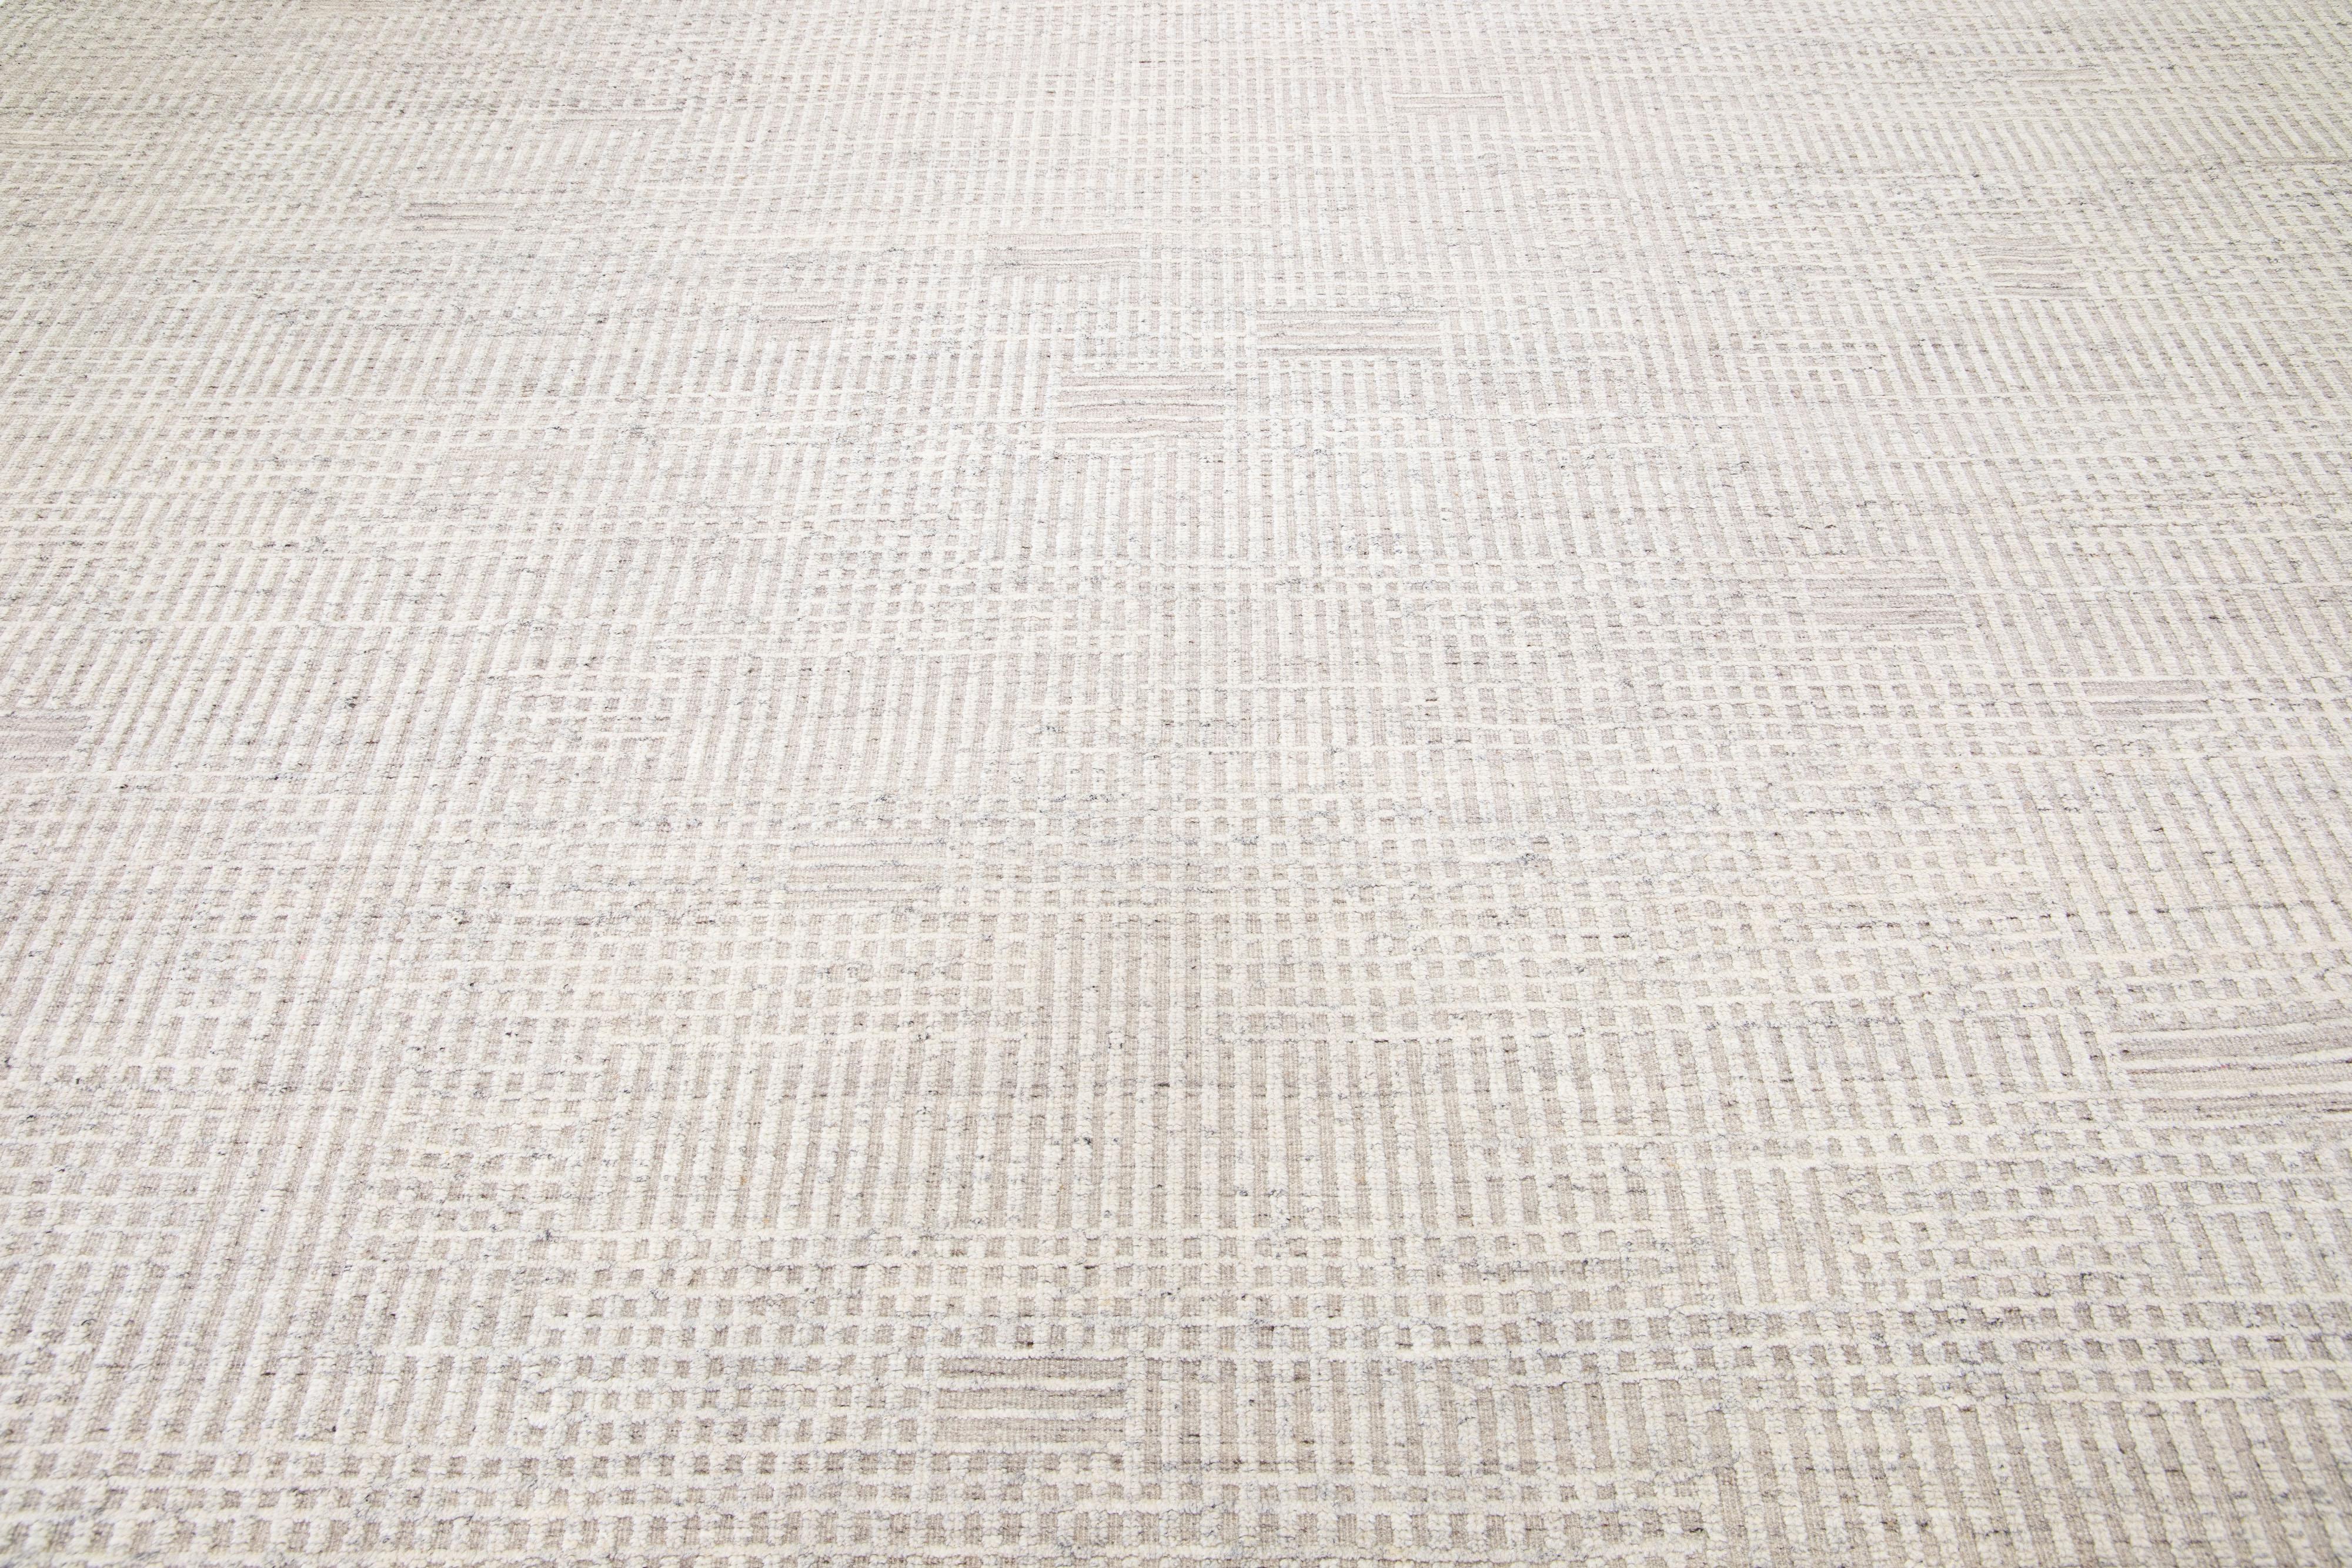 Beautiful modern Moroccan-style hand-knotted wool rug with a beige color field. This rug is part of our Apadana's Safi Collection and features a minimalist design in white and gray.

This rug measures: 12'3